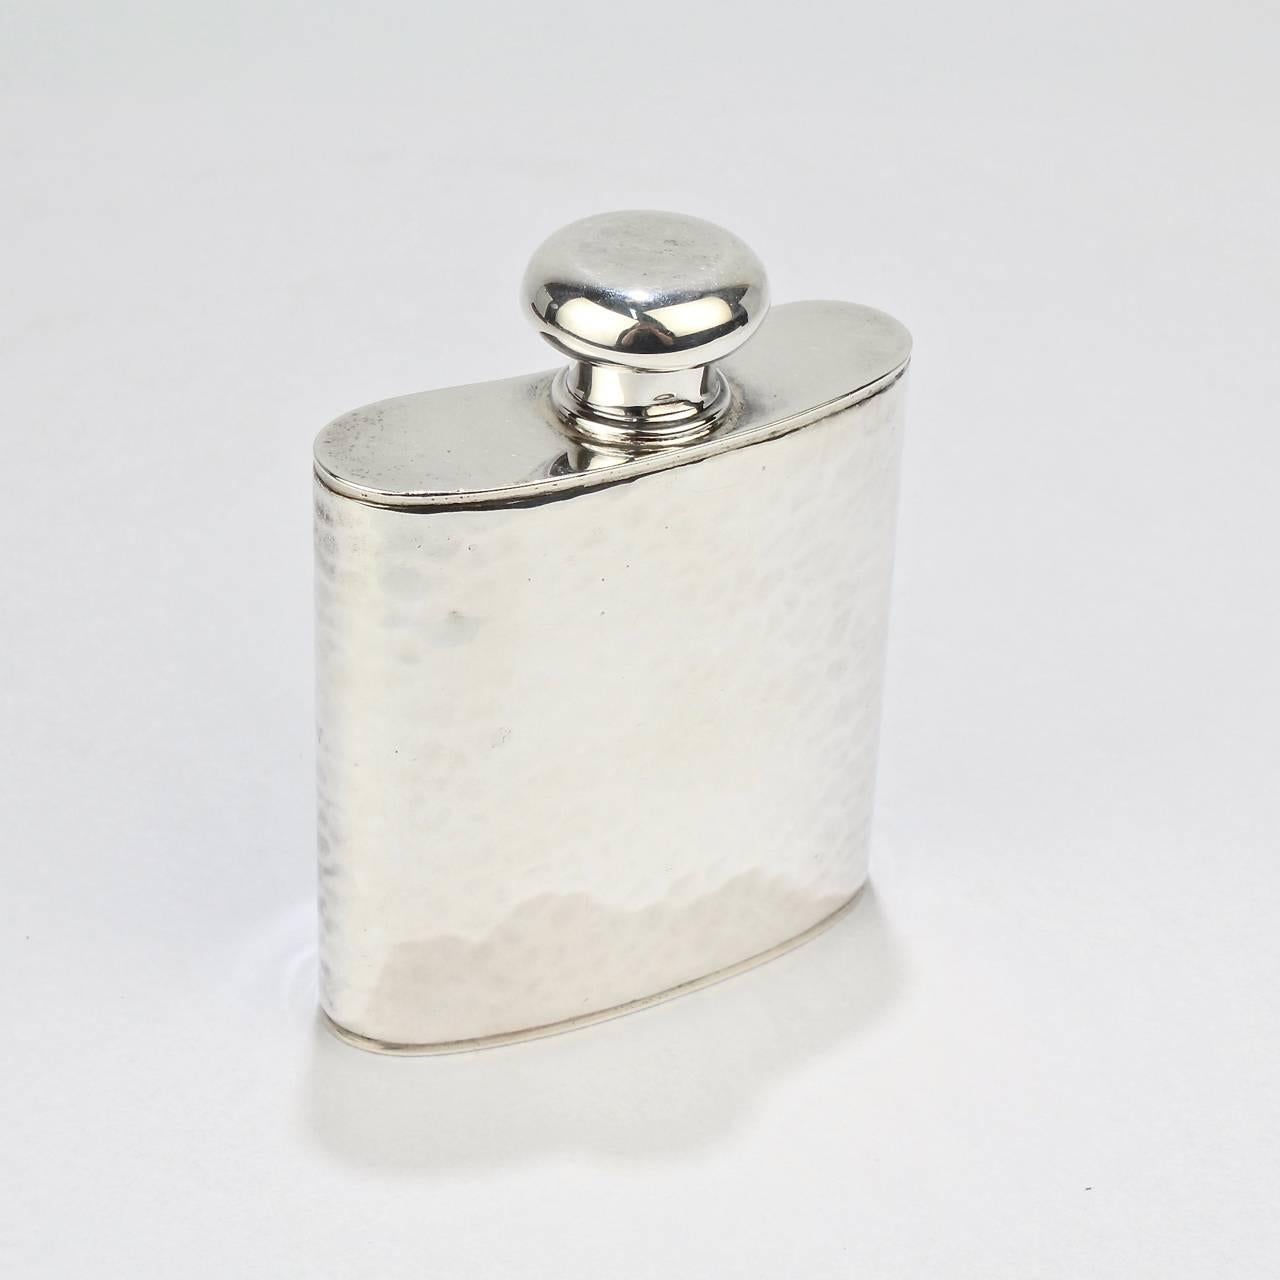 Hand-Hammered Sterling Silver Liquor or Whisky Hip Flask by Schroth 2